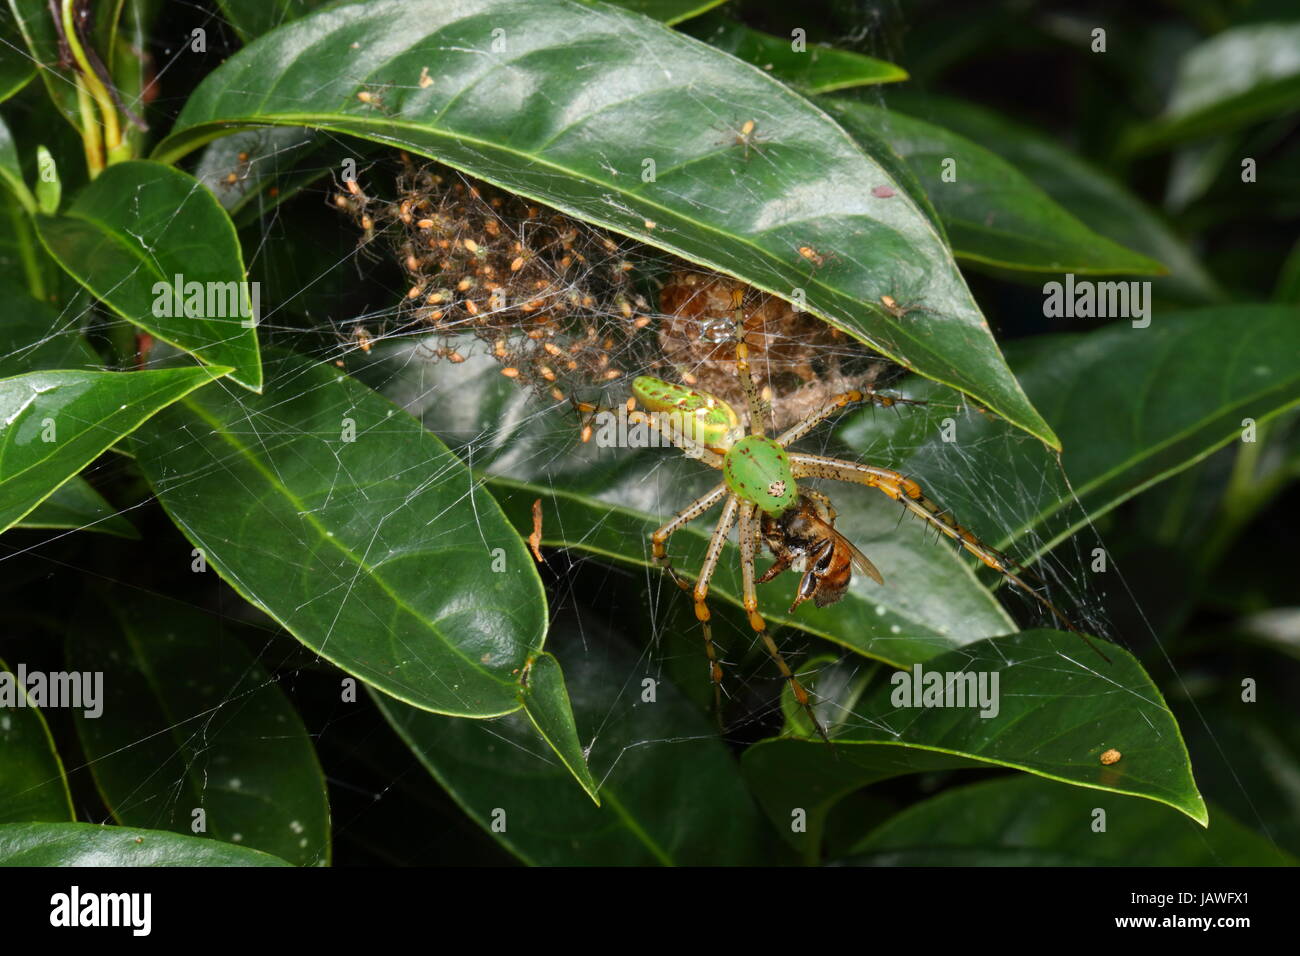 A green lynx spider with babies, Peucetia viridans, preying on a honey bee. Stock Photo